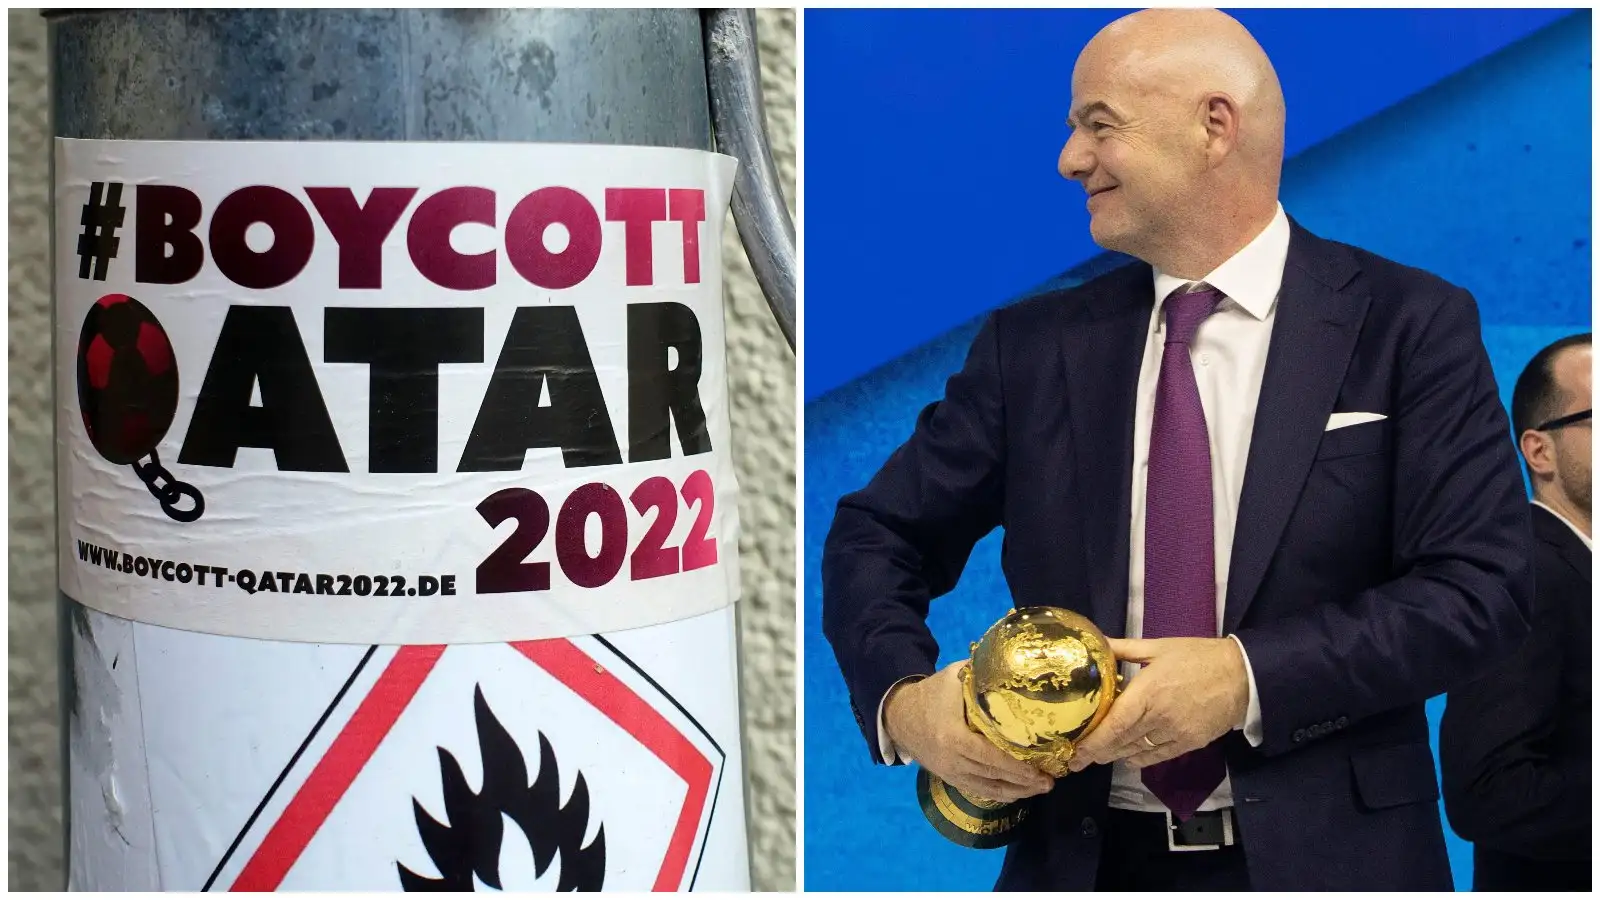 FIFA president Gianni Infantino with the World Cup trophy ahead of the tournament in Qatar.